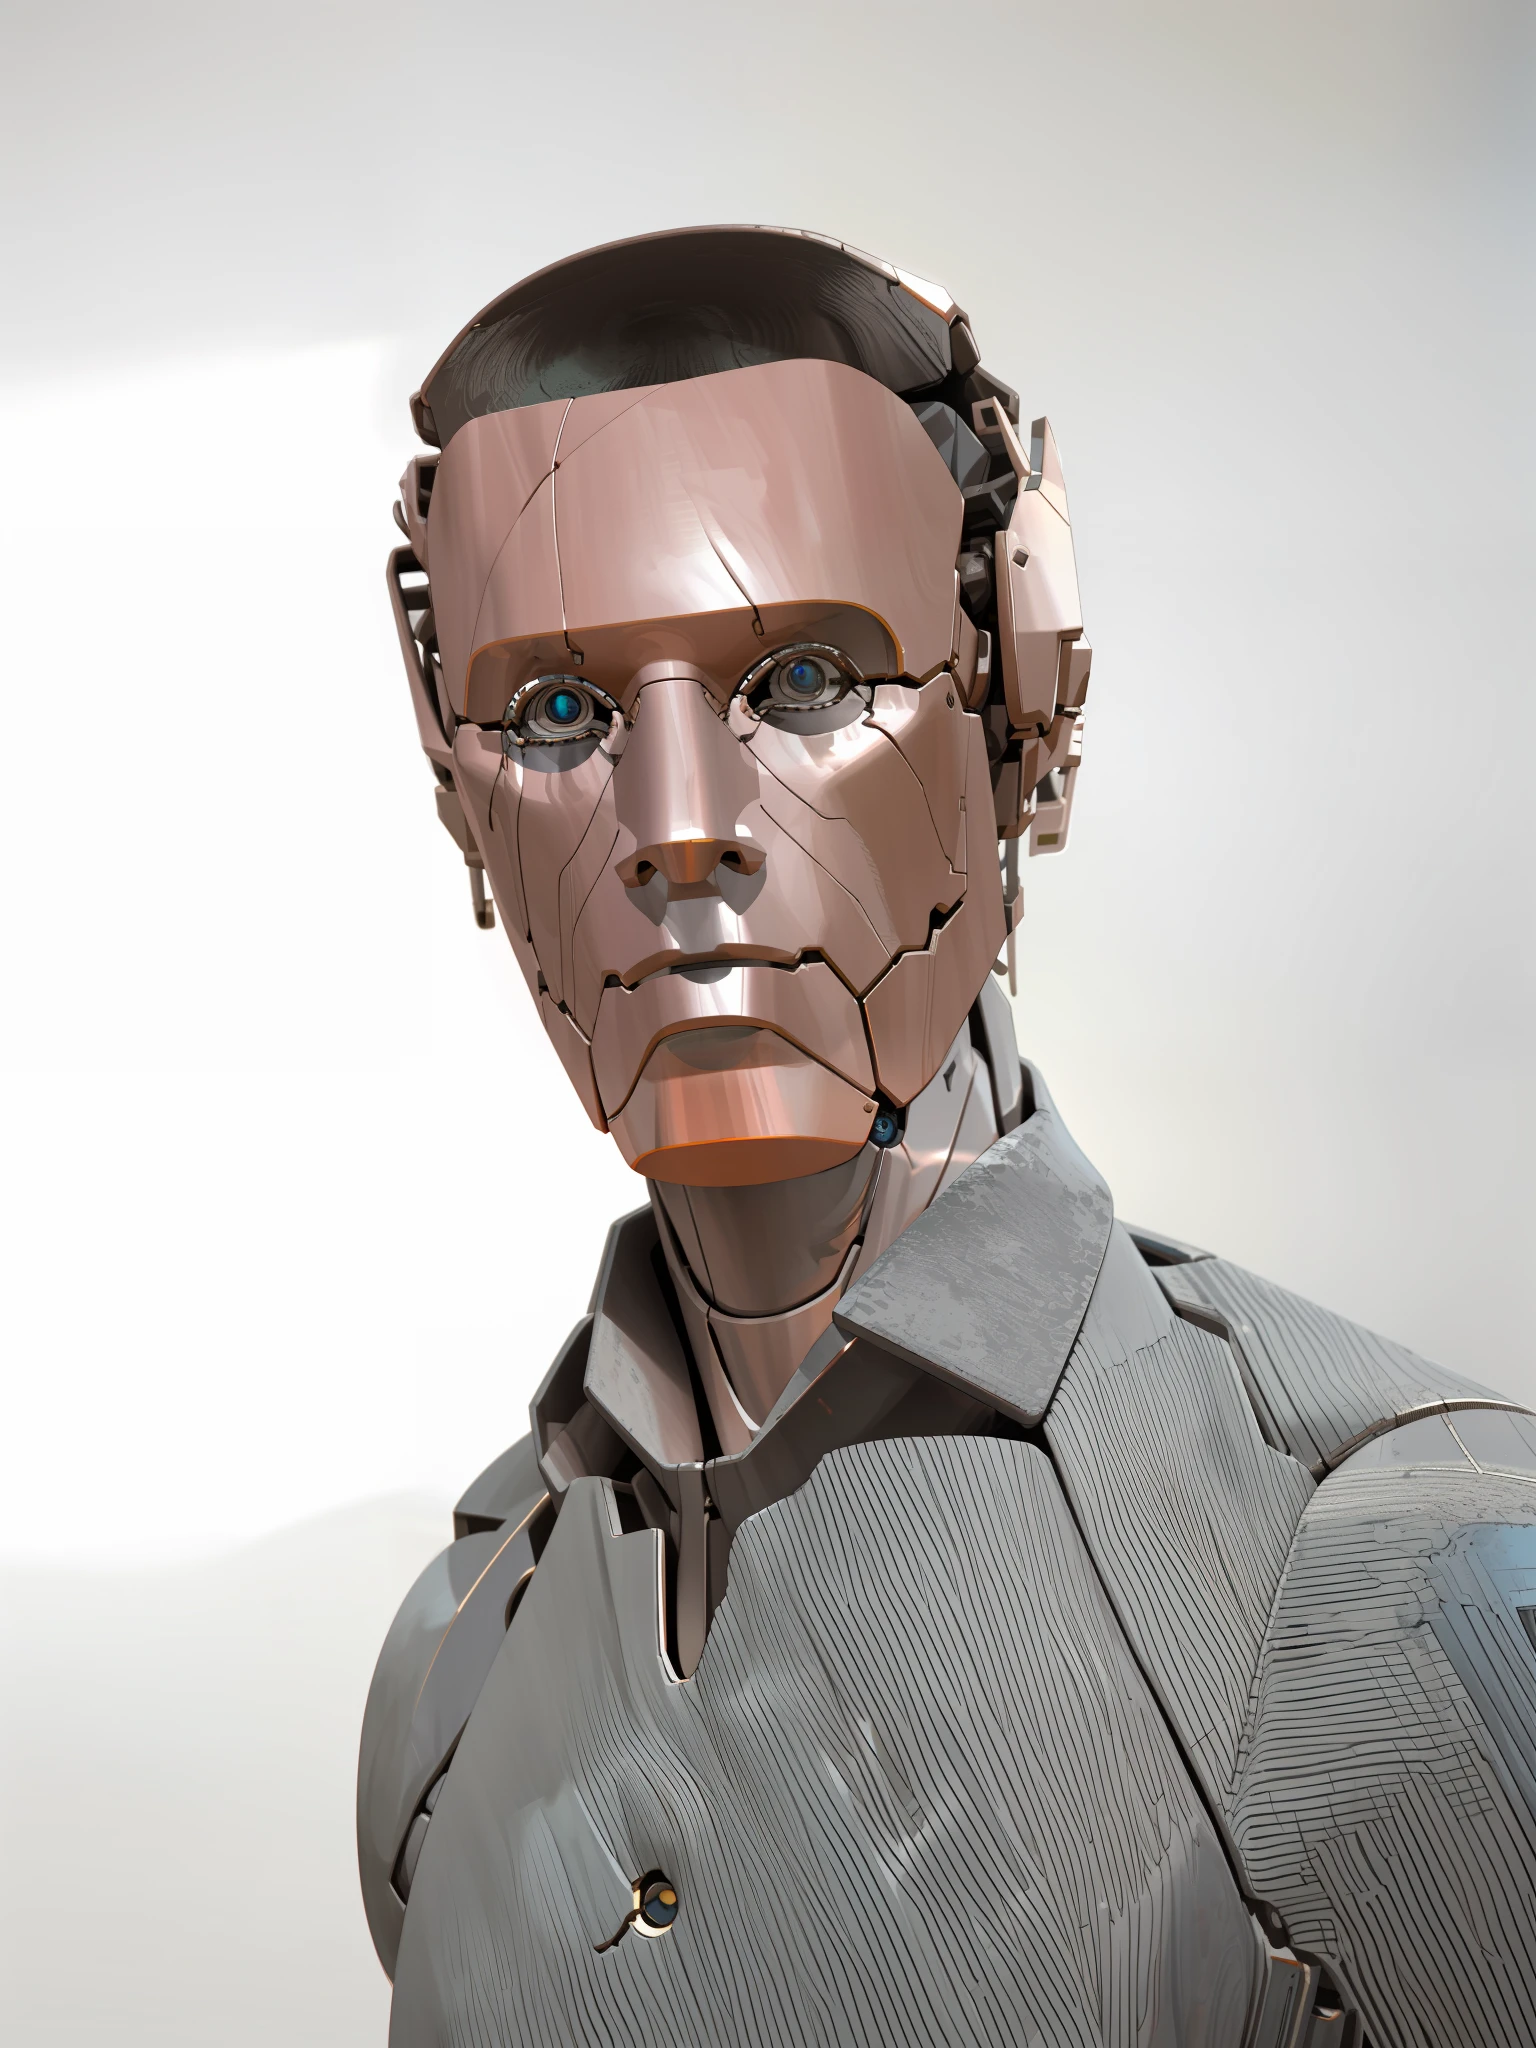 HD, (Best Detail) (Best Quality), Robot, Cool Colors, Master Painting, ((3D Model Style)), Eyes, Pupils, Araffed Man in Gray Shirt posing for photo